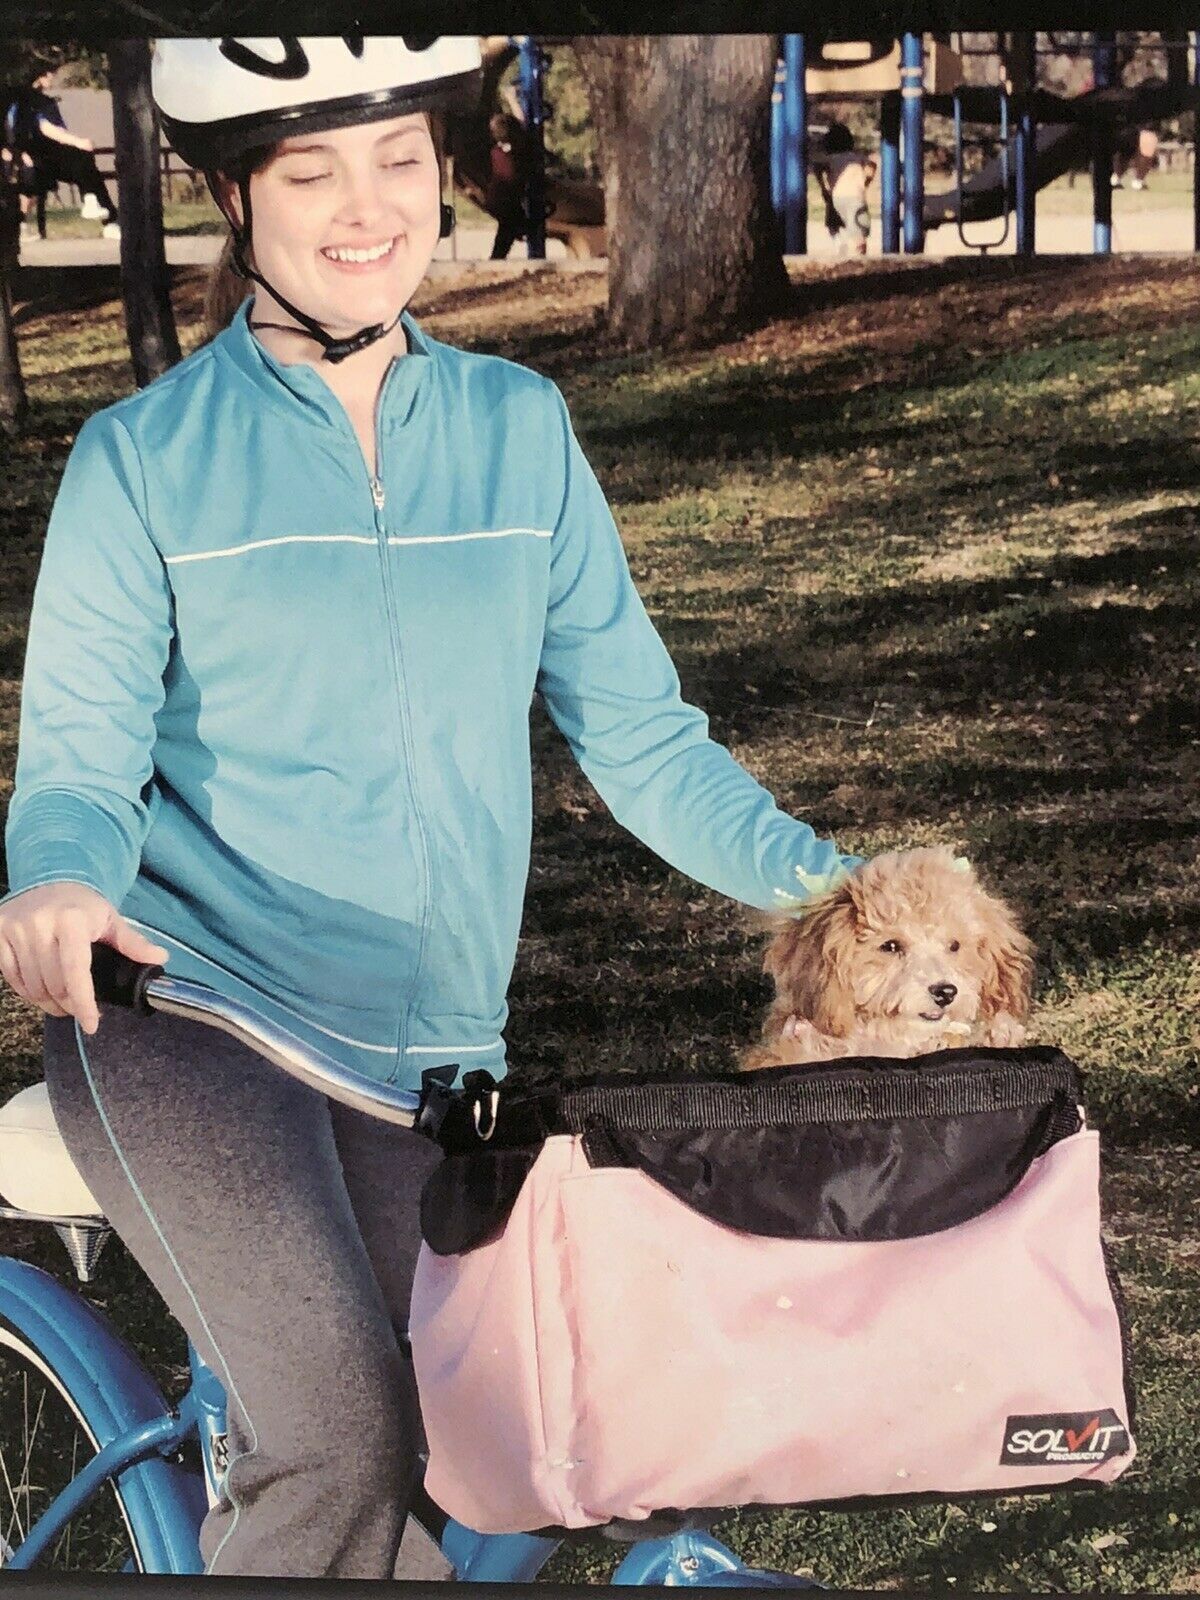 Solvit Tagalong Bicycle Seat Pet Dog Carrier Pink With Shadow Water Case-
sho... - $112.27